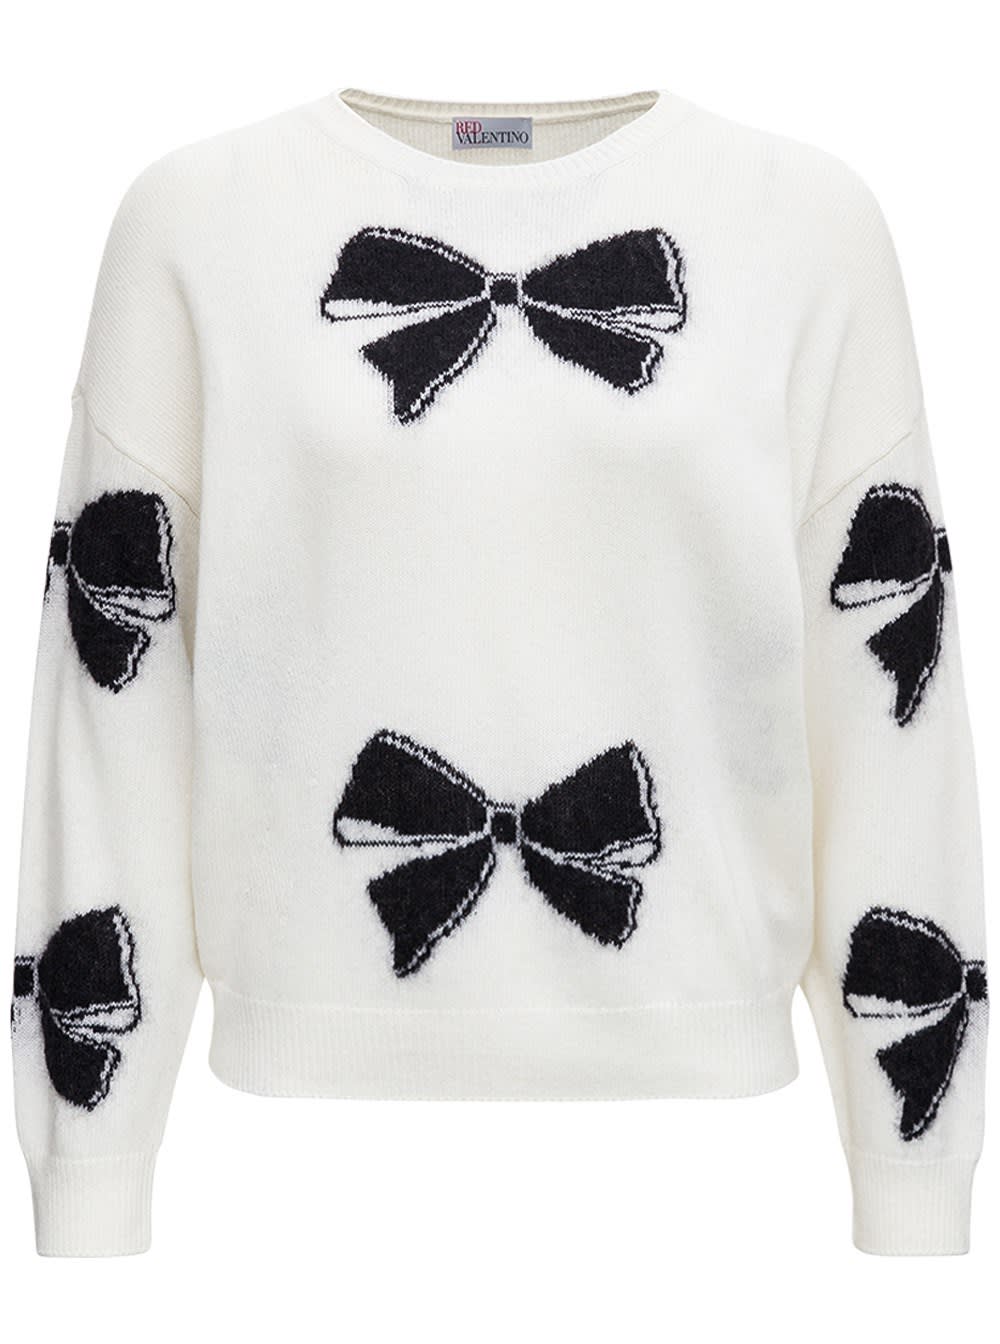 RED Valentino Wool Blend Sweater With Bows Allover Print